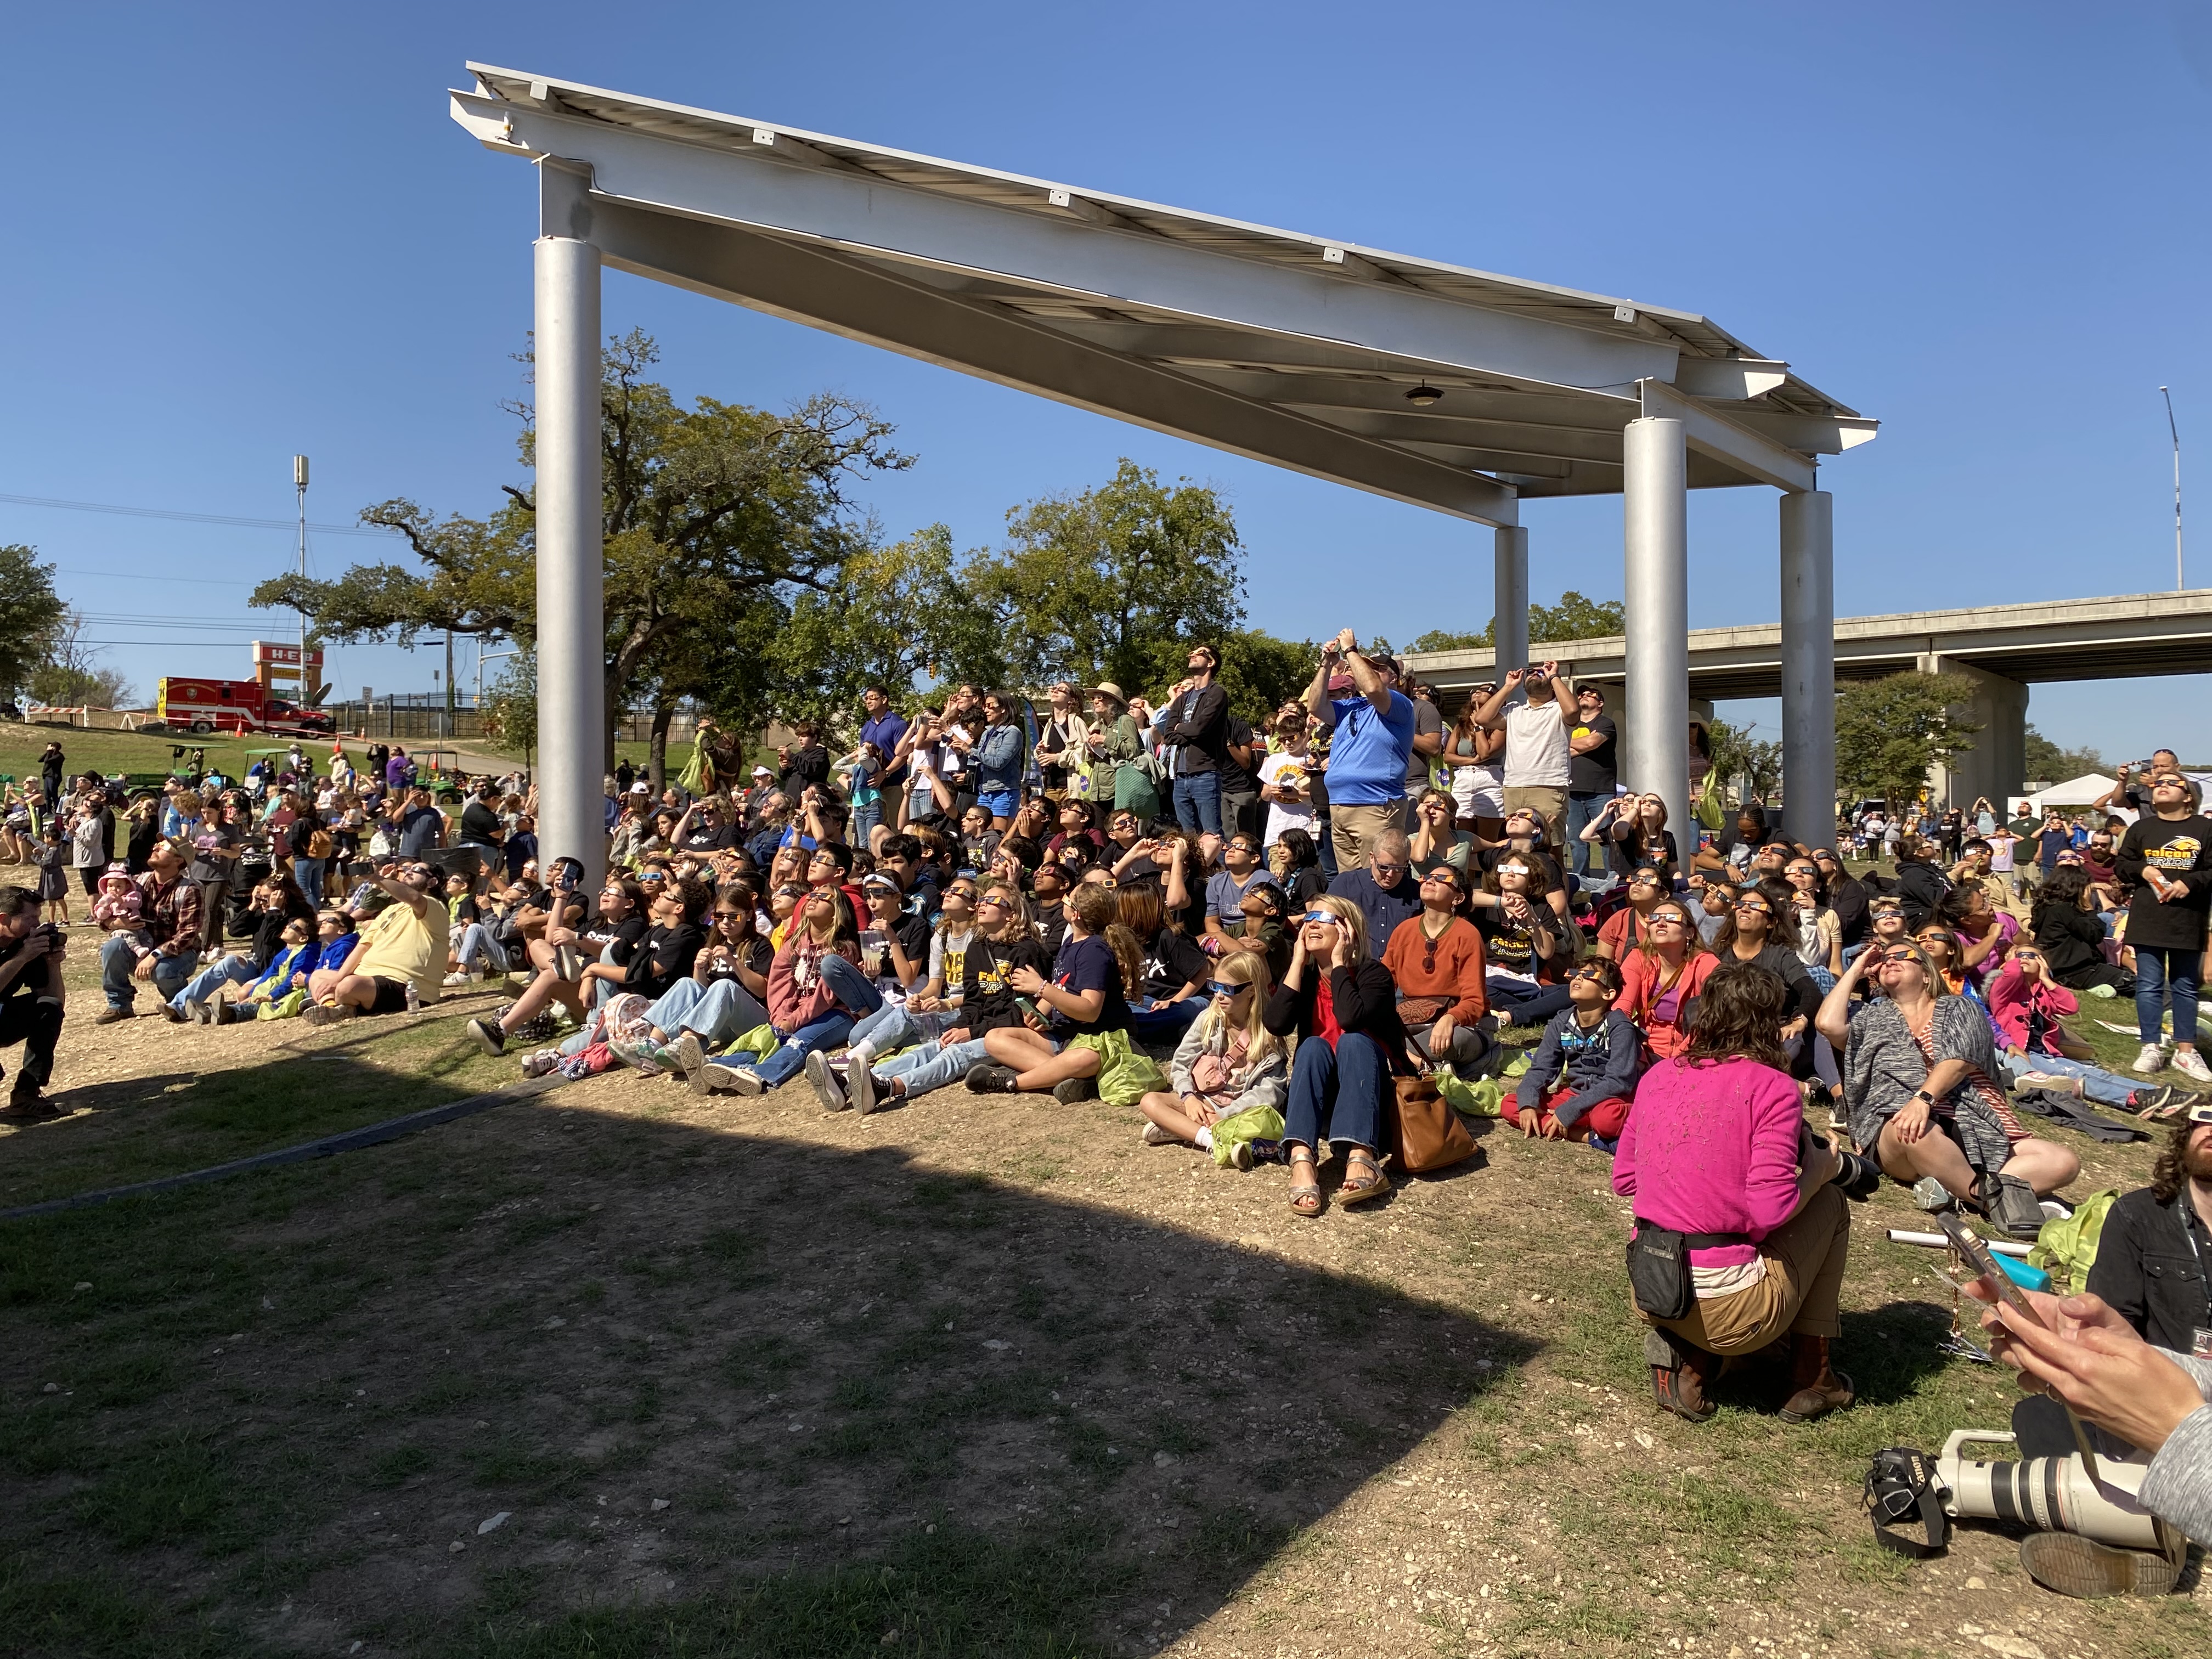 A large group of people sit on grass below a pavilion, holding eclipse glasses up to their eyes.